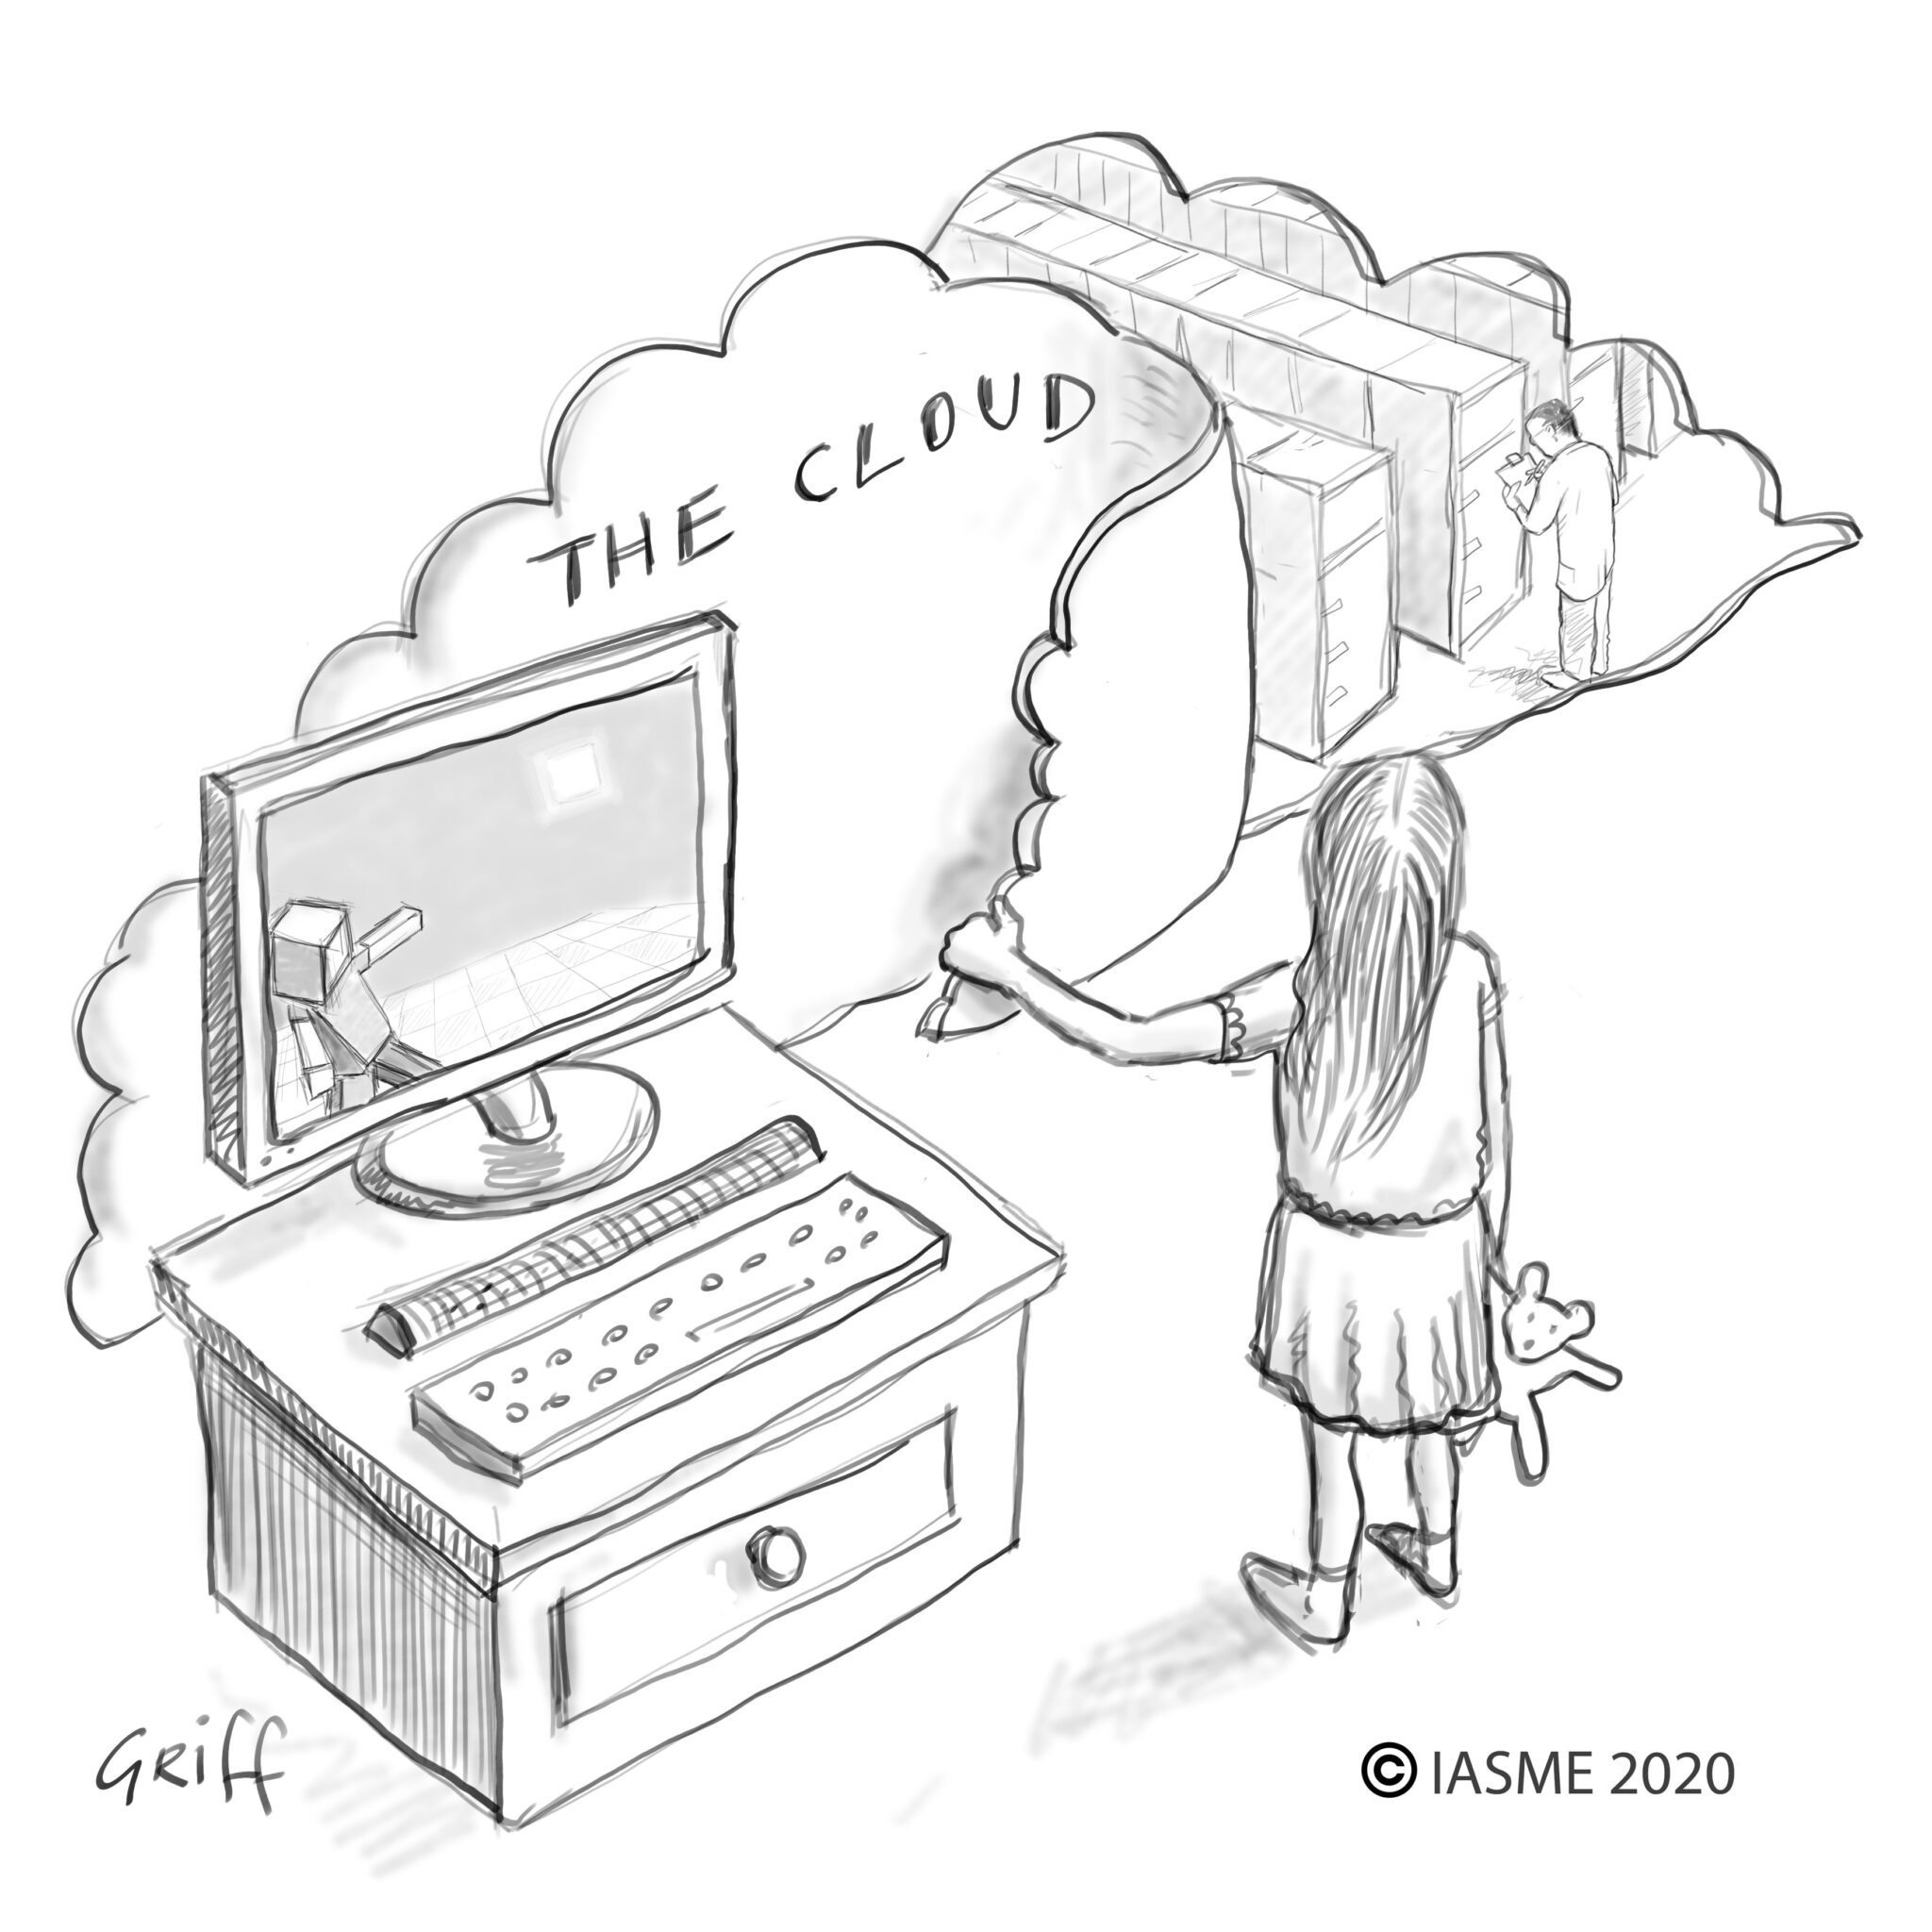 The Cloud Cyber Essentials